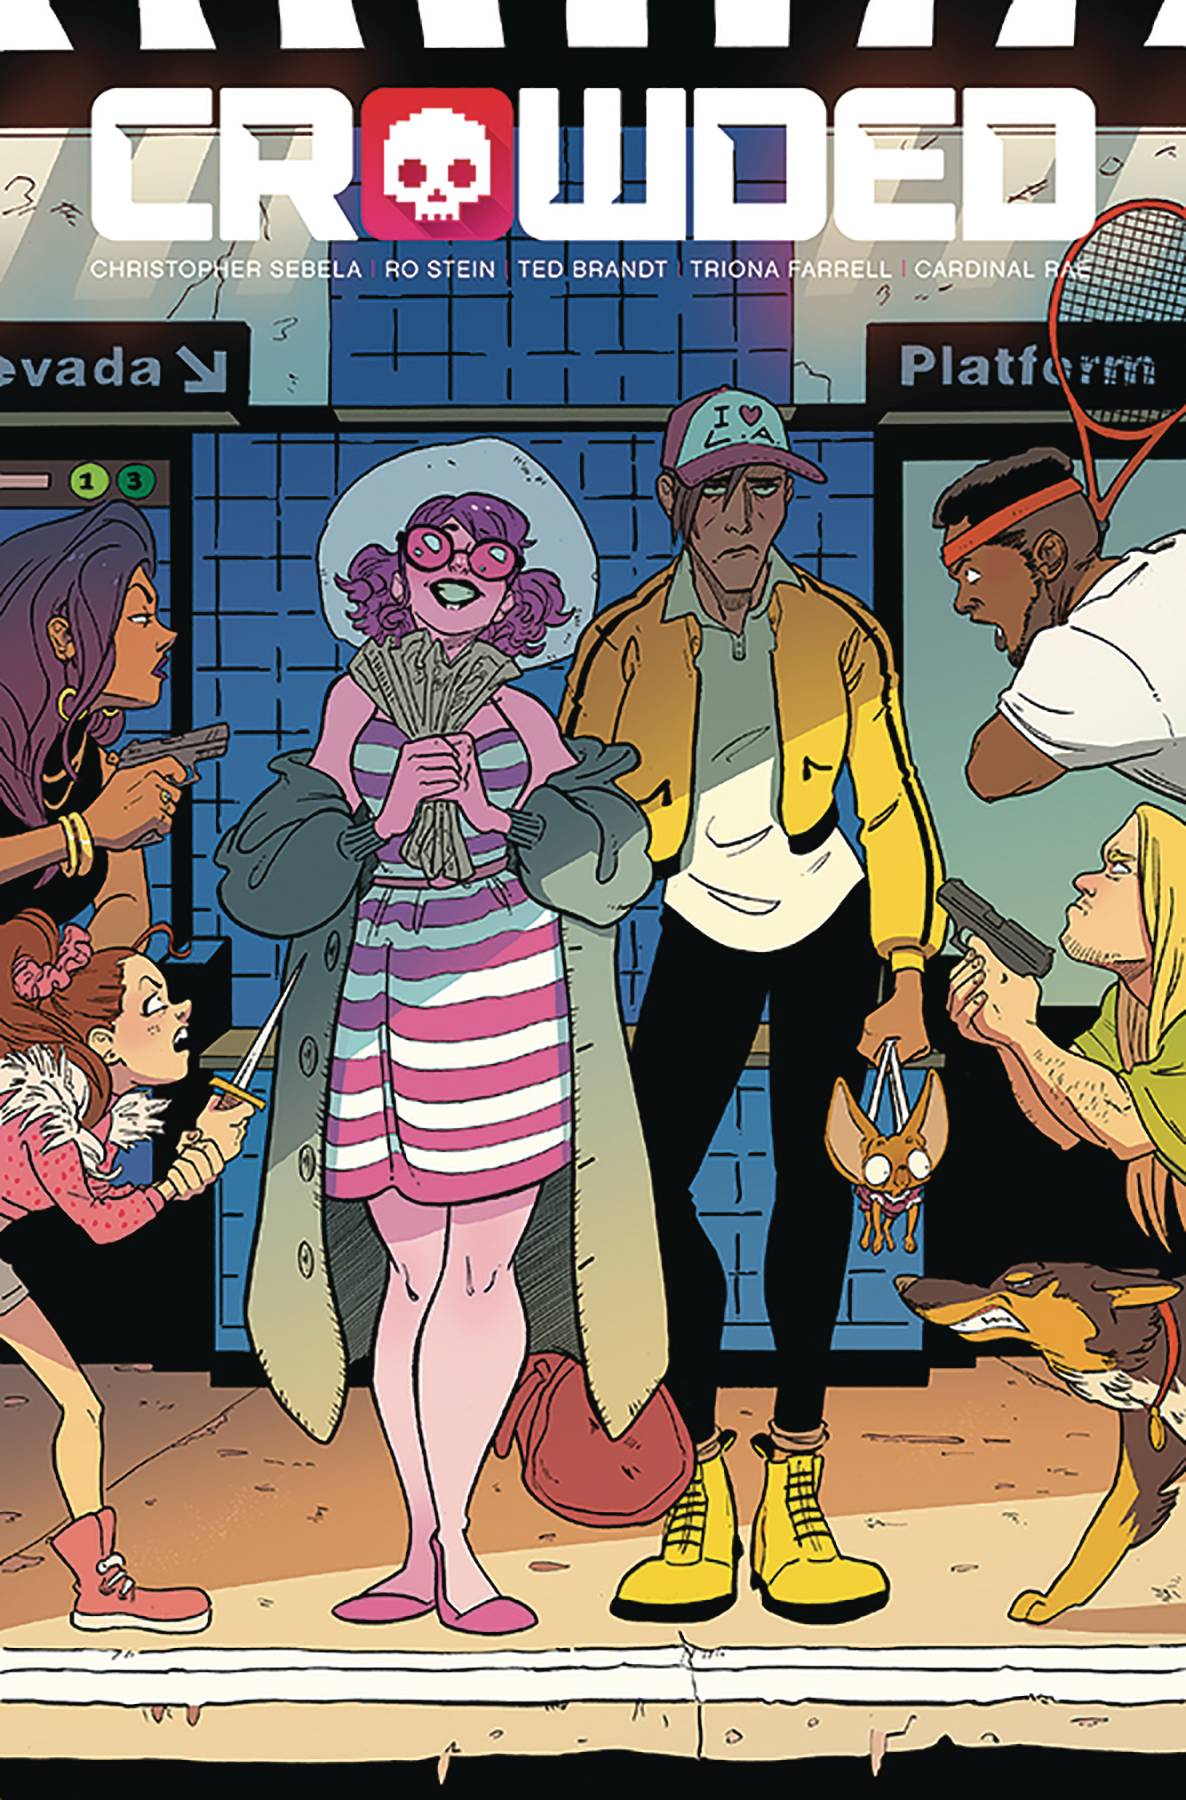 Crowded #7 Cover A Stein Brandt & Farrell